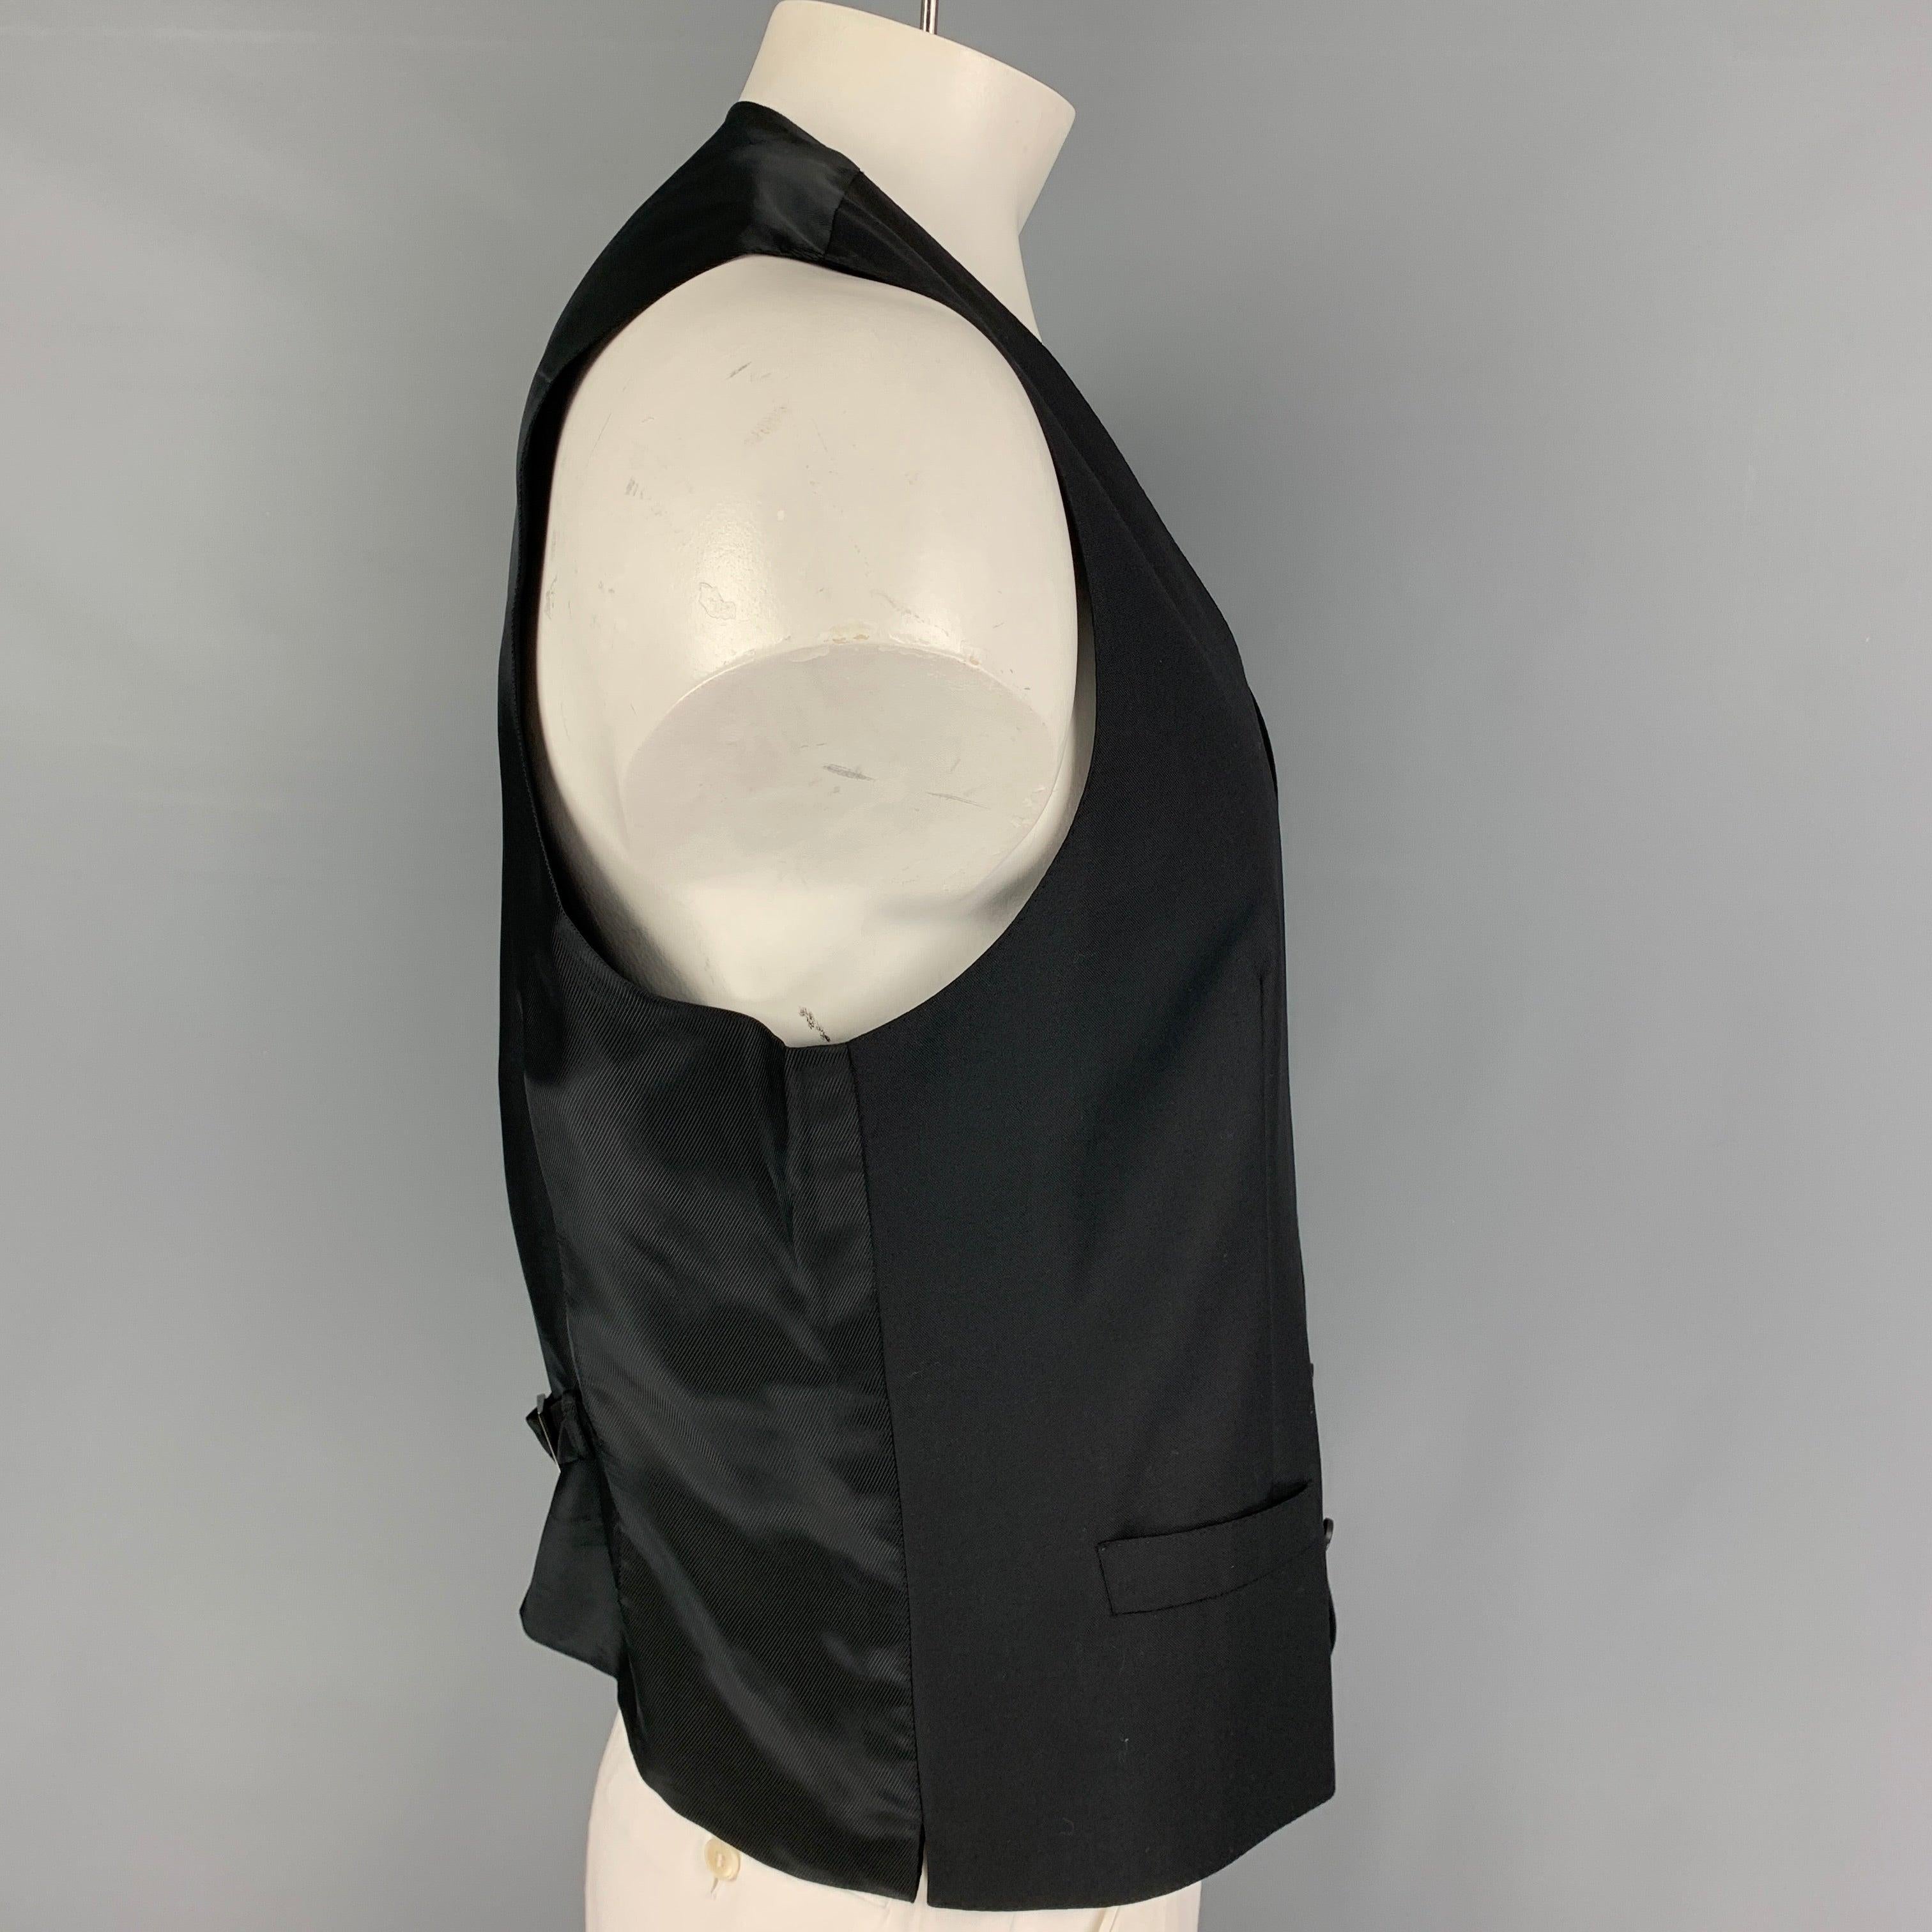 DOLCE & GABBANA vest comes in a black viscose blend featuring a adjustable back strap, slit pockets, and a buttoned closure. Made in Italy.
Excellent
Pre-Owned Condition. 

Marked:   54 

Measurements: 
 
Shoulder: 15 inches  Chest:
44 inches